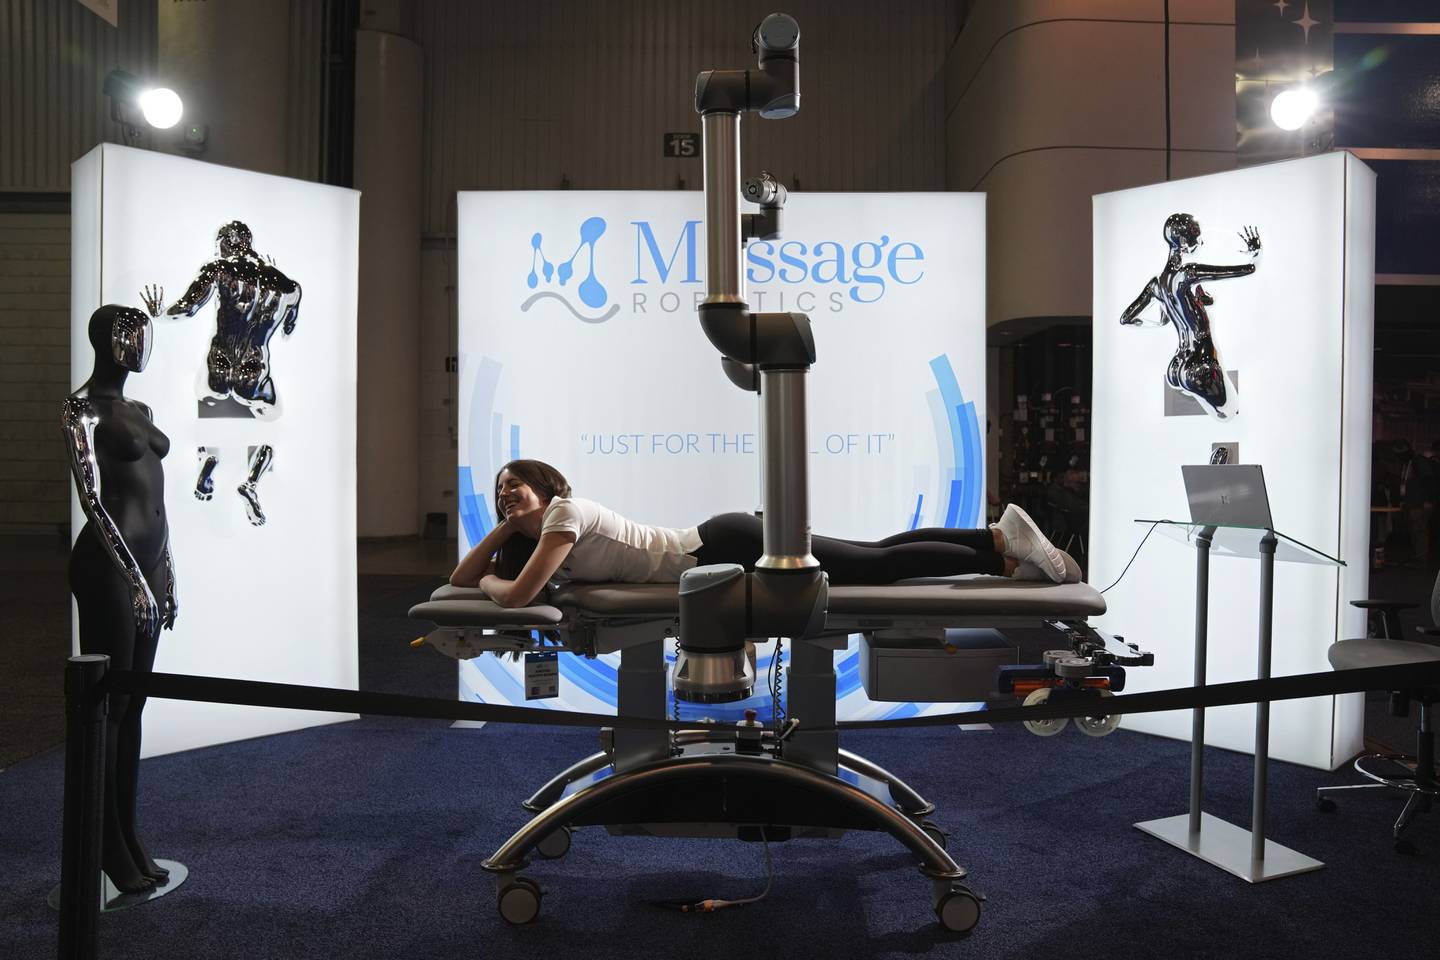 A woman lies on a robotic massage table at the Massage Robotics booth during the CES tech show in Las Vegas. AP